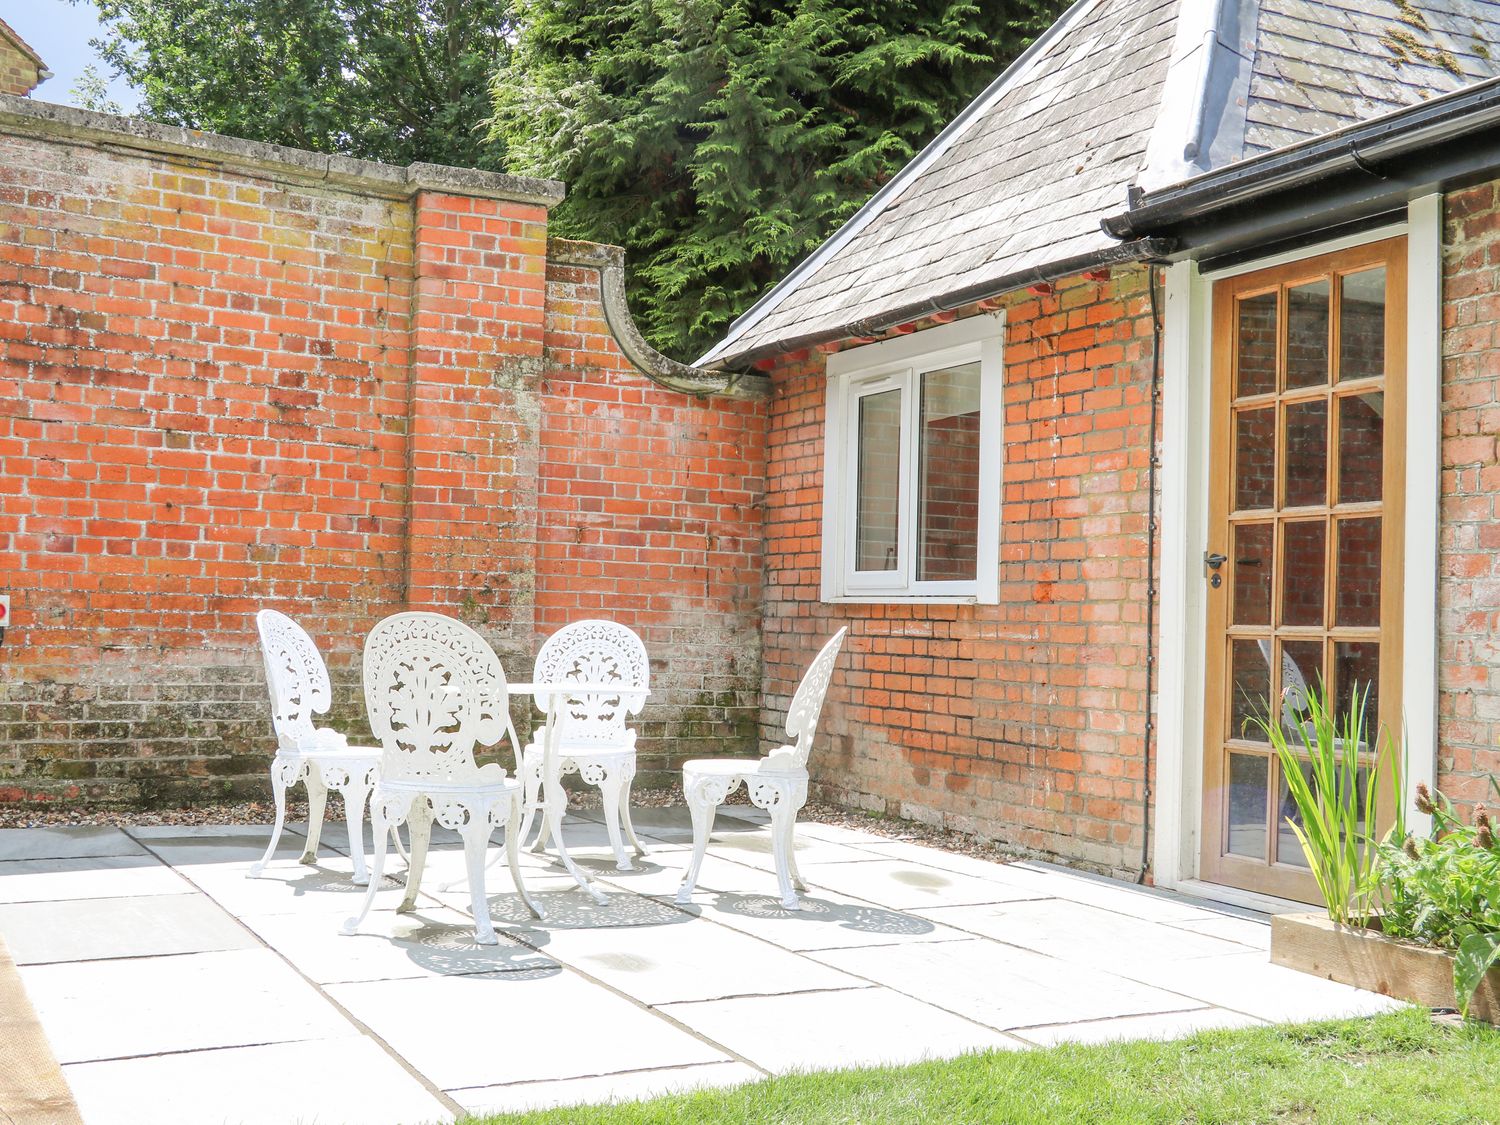 The Gardeners Cottage, Hook near Hartley Wintney, Hampshire. Hot tub. Smart TV. Off-road parking x 3